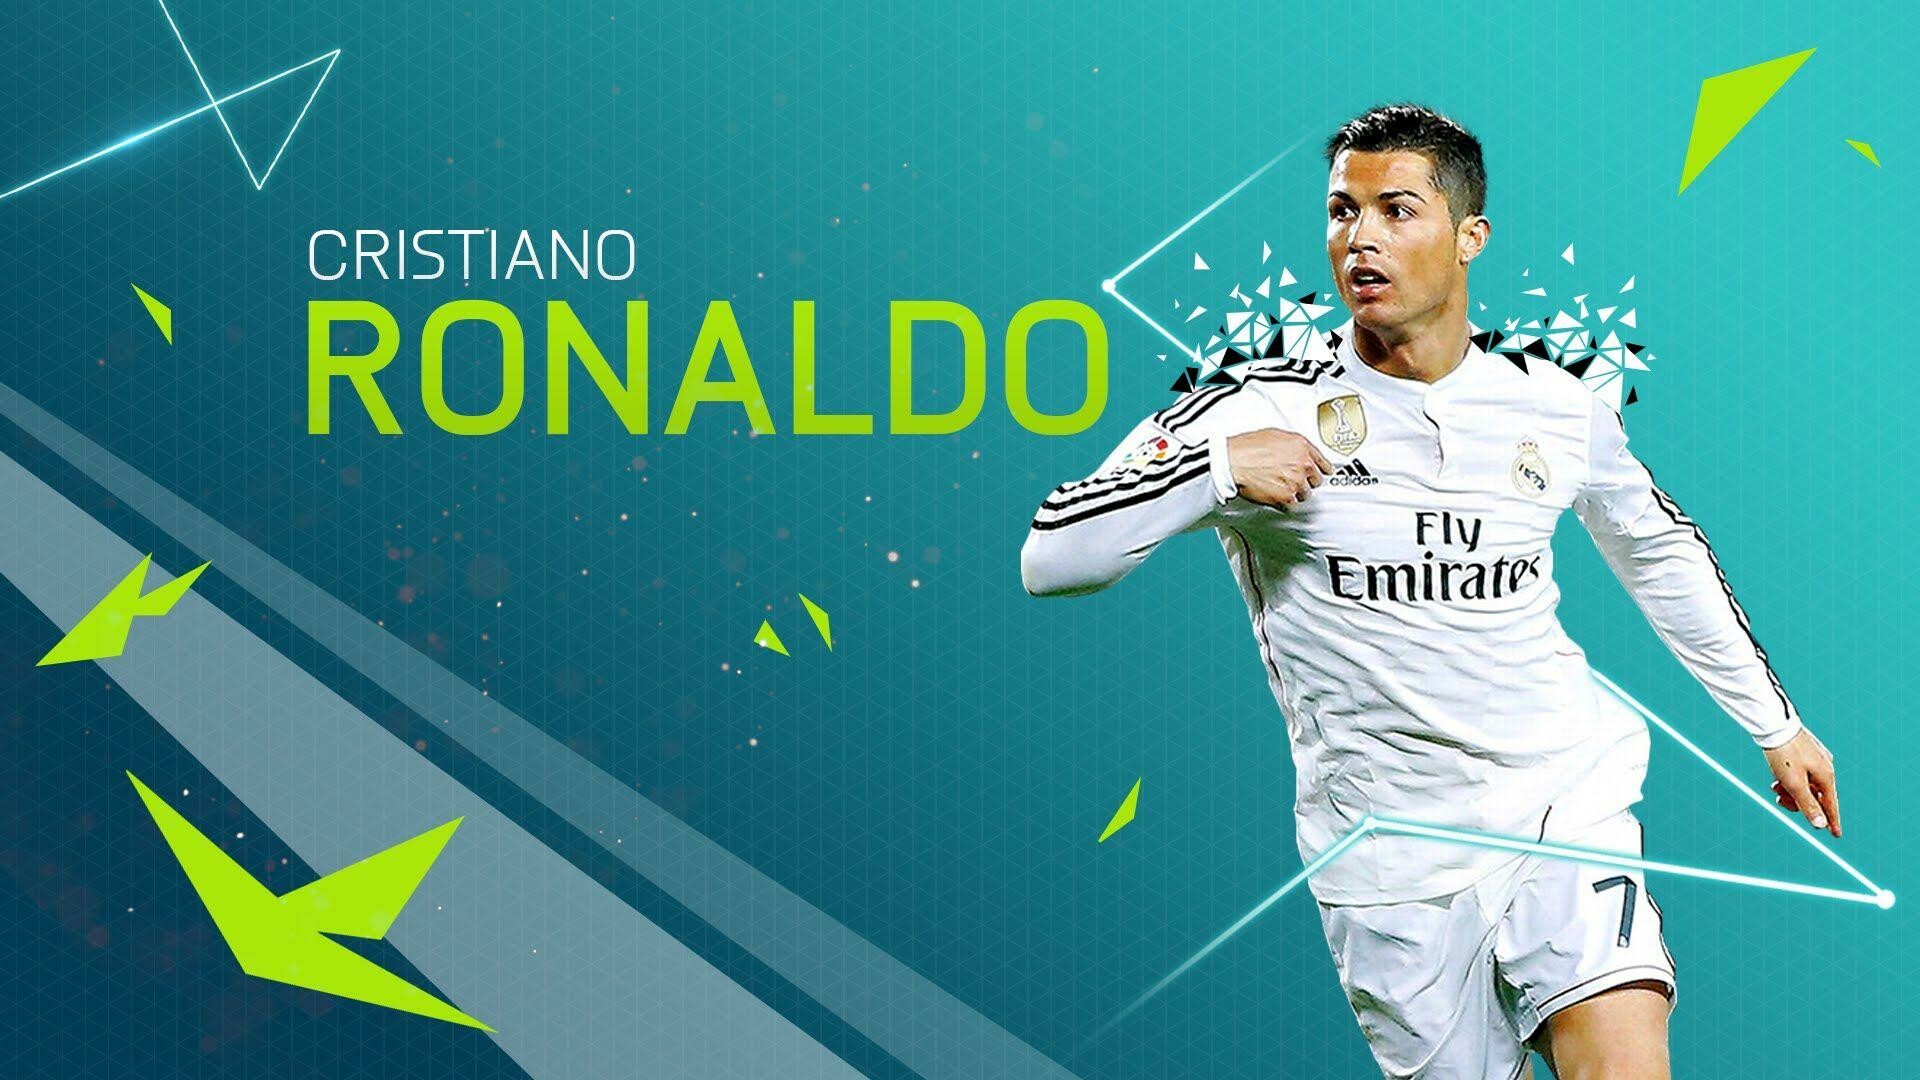 FIFA: Cristiano Ronaldo, Featured as the cover athlete. 1920x1080 Full HD Background.